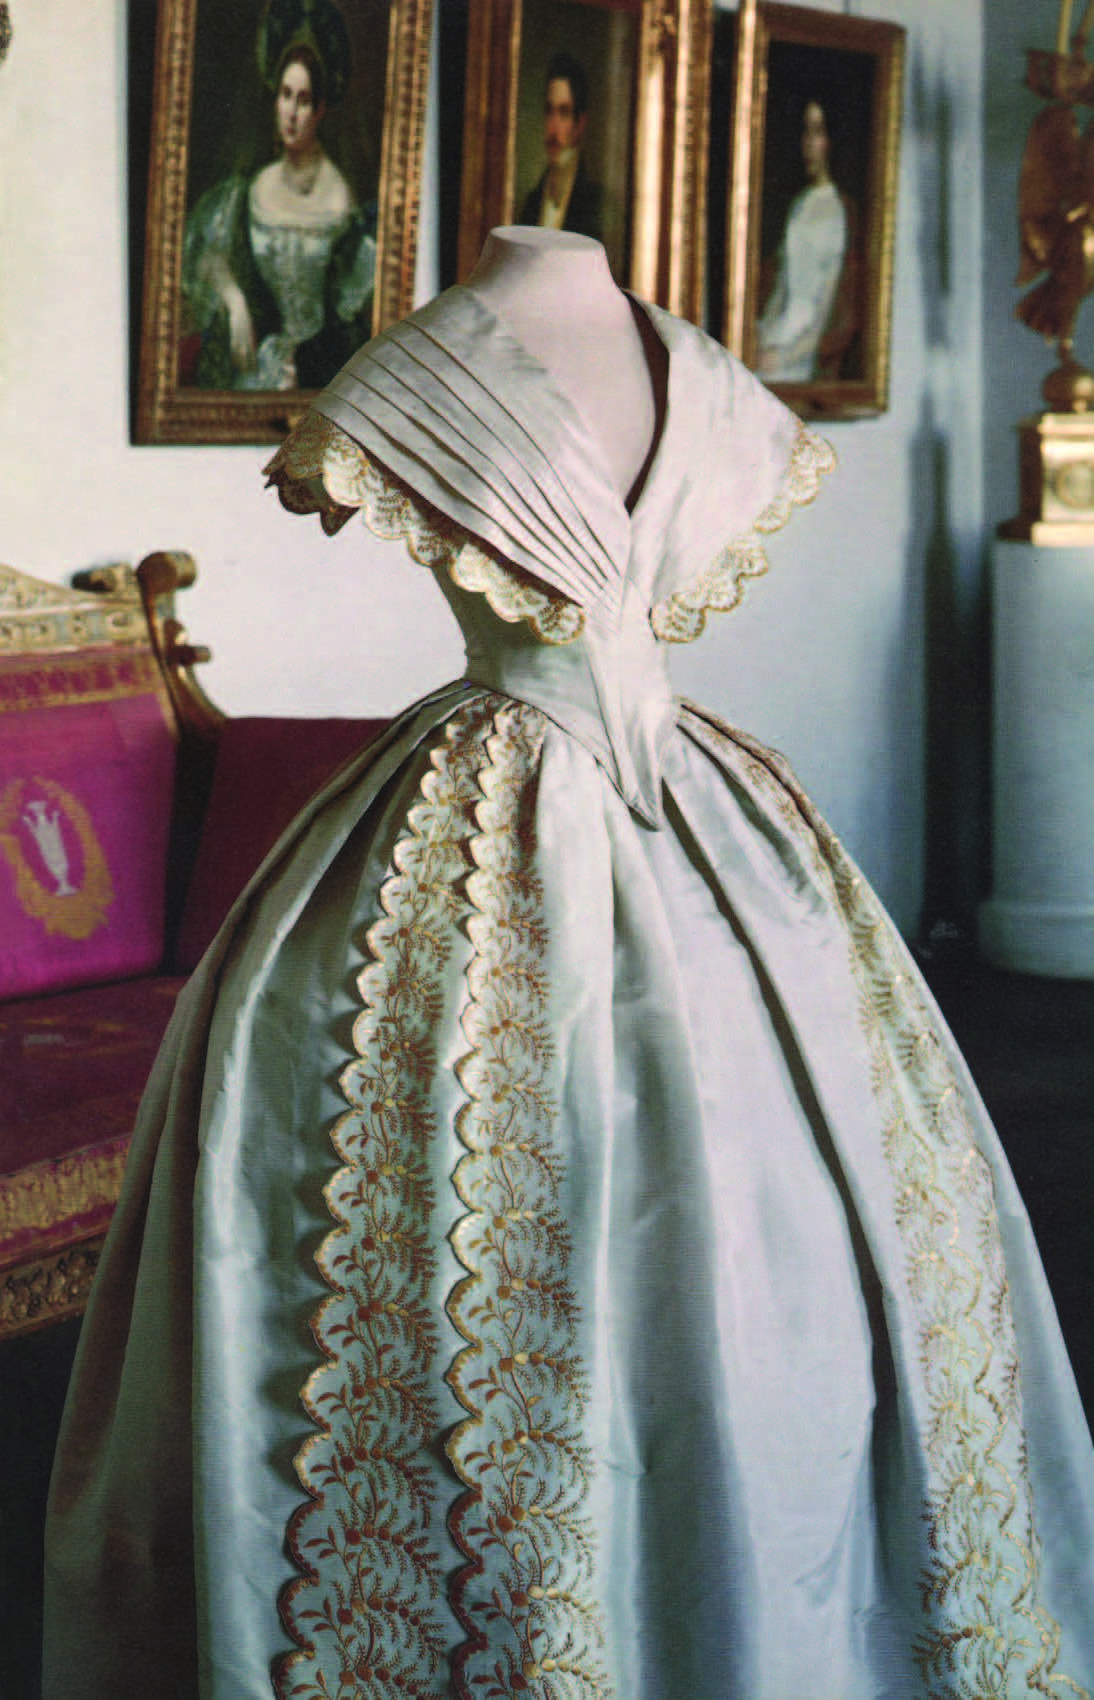 History of Russian Costume from the Eleventh to the Twentieth Century : From the collections of the Arsenal Museum, Leningrad; Hermitage, Leningrad; Historical Museum, Moscow; Kremlin Museums, Moscow; Pavlovsk Museum. — New York : The Metropolitan Museum of Art, 1977